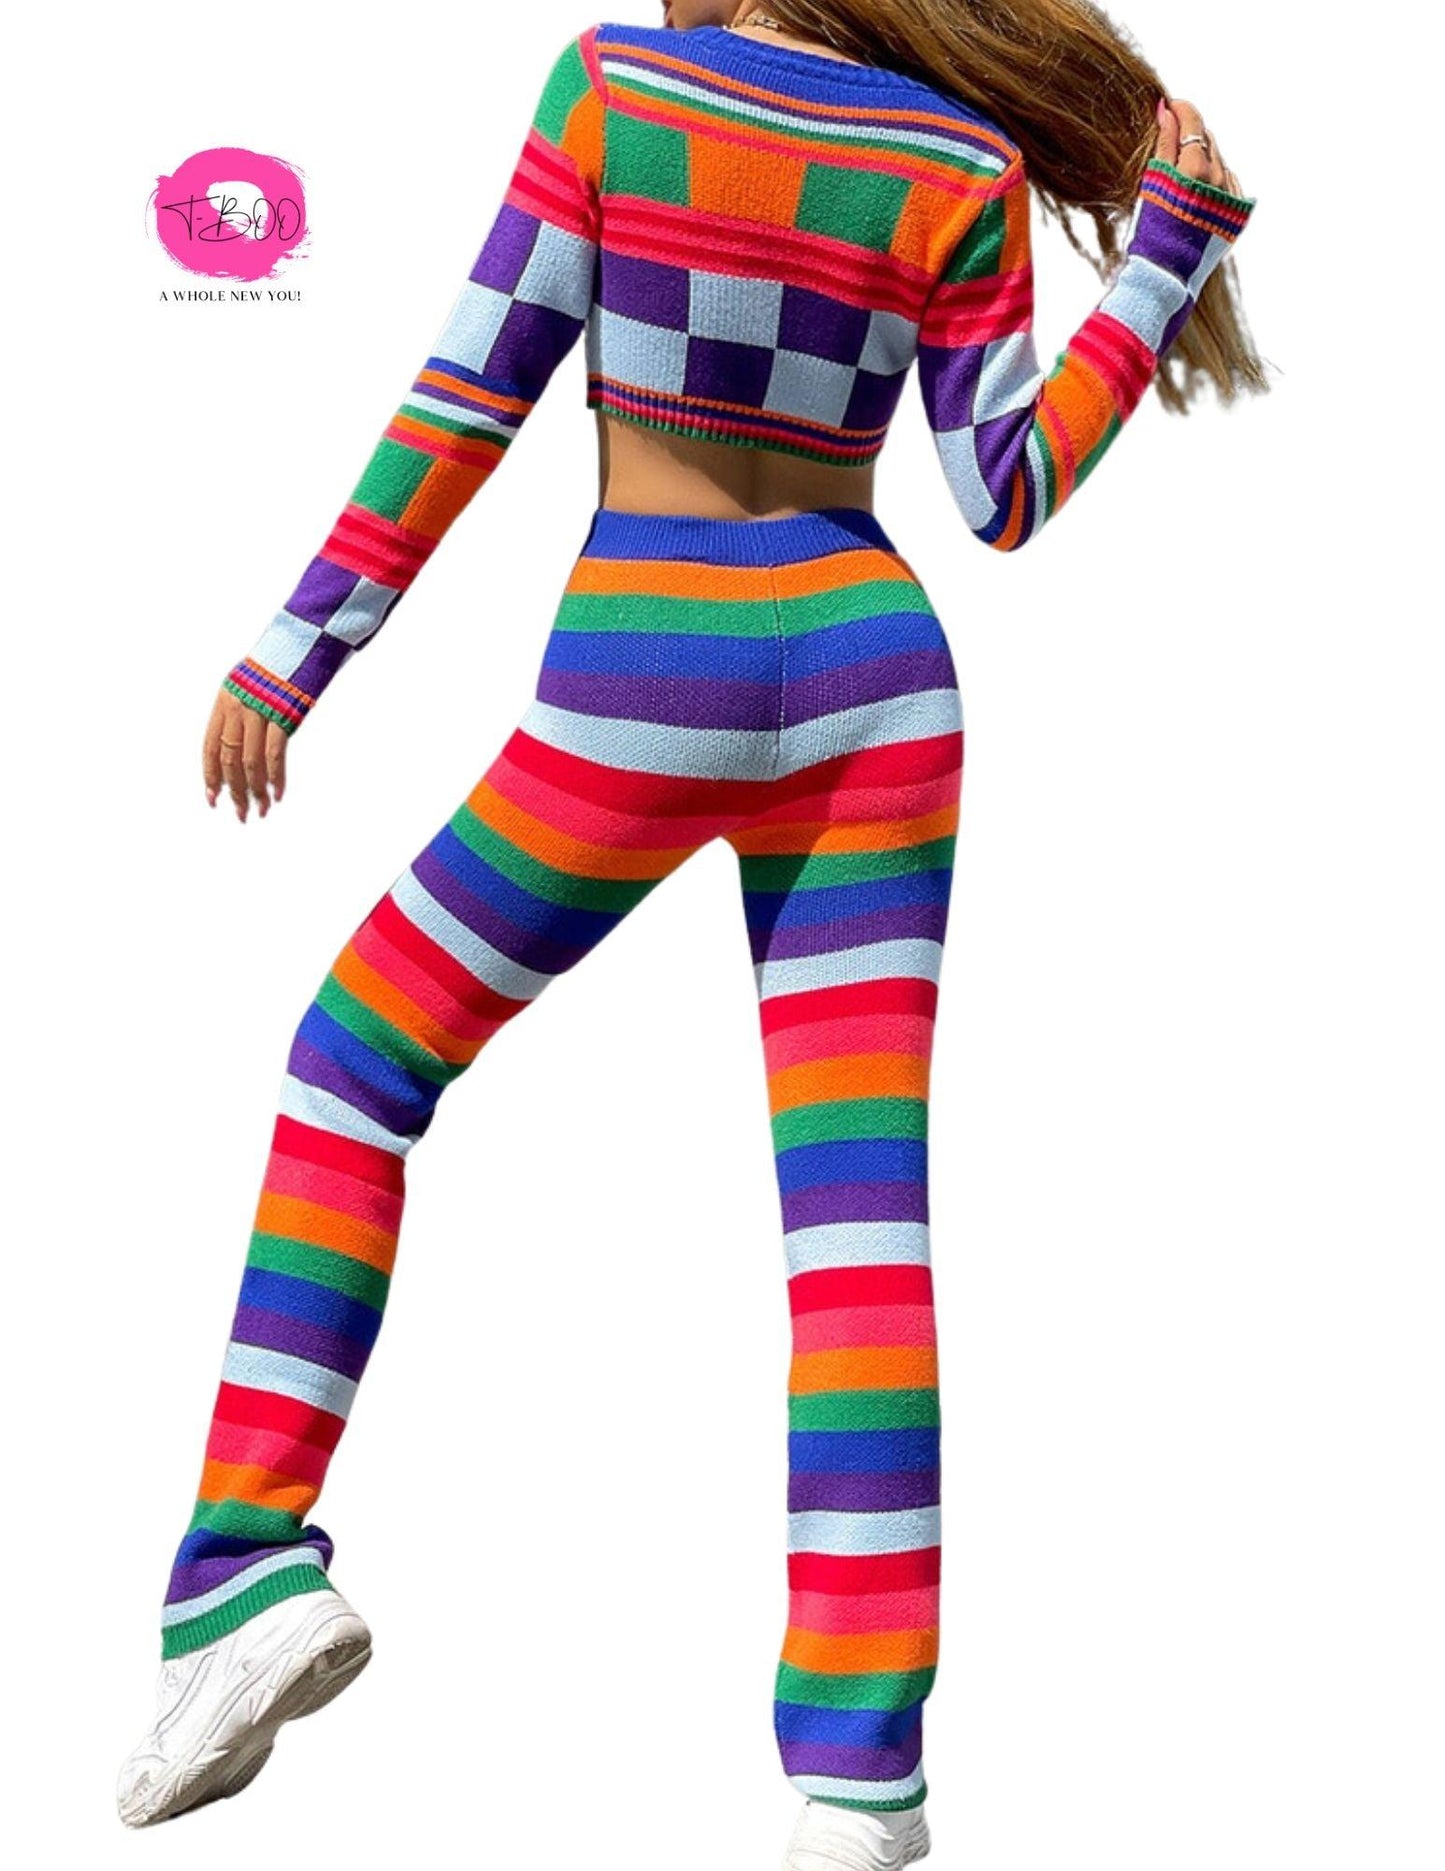 T-BOO Women 2 Piece Set Knit Fashion Tracksuit Colorful Thick Full Sleeve Crop Top+Straight Pants Matching Streetwear Outfits